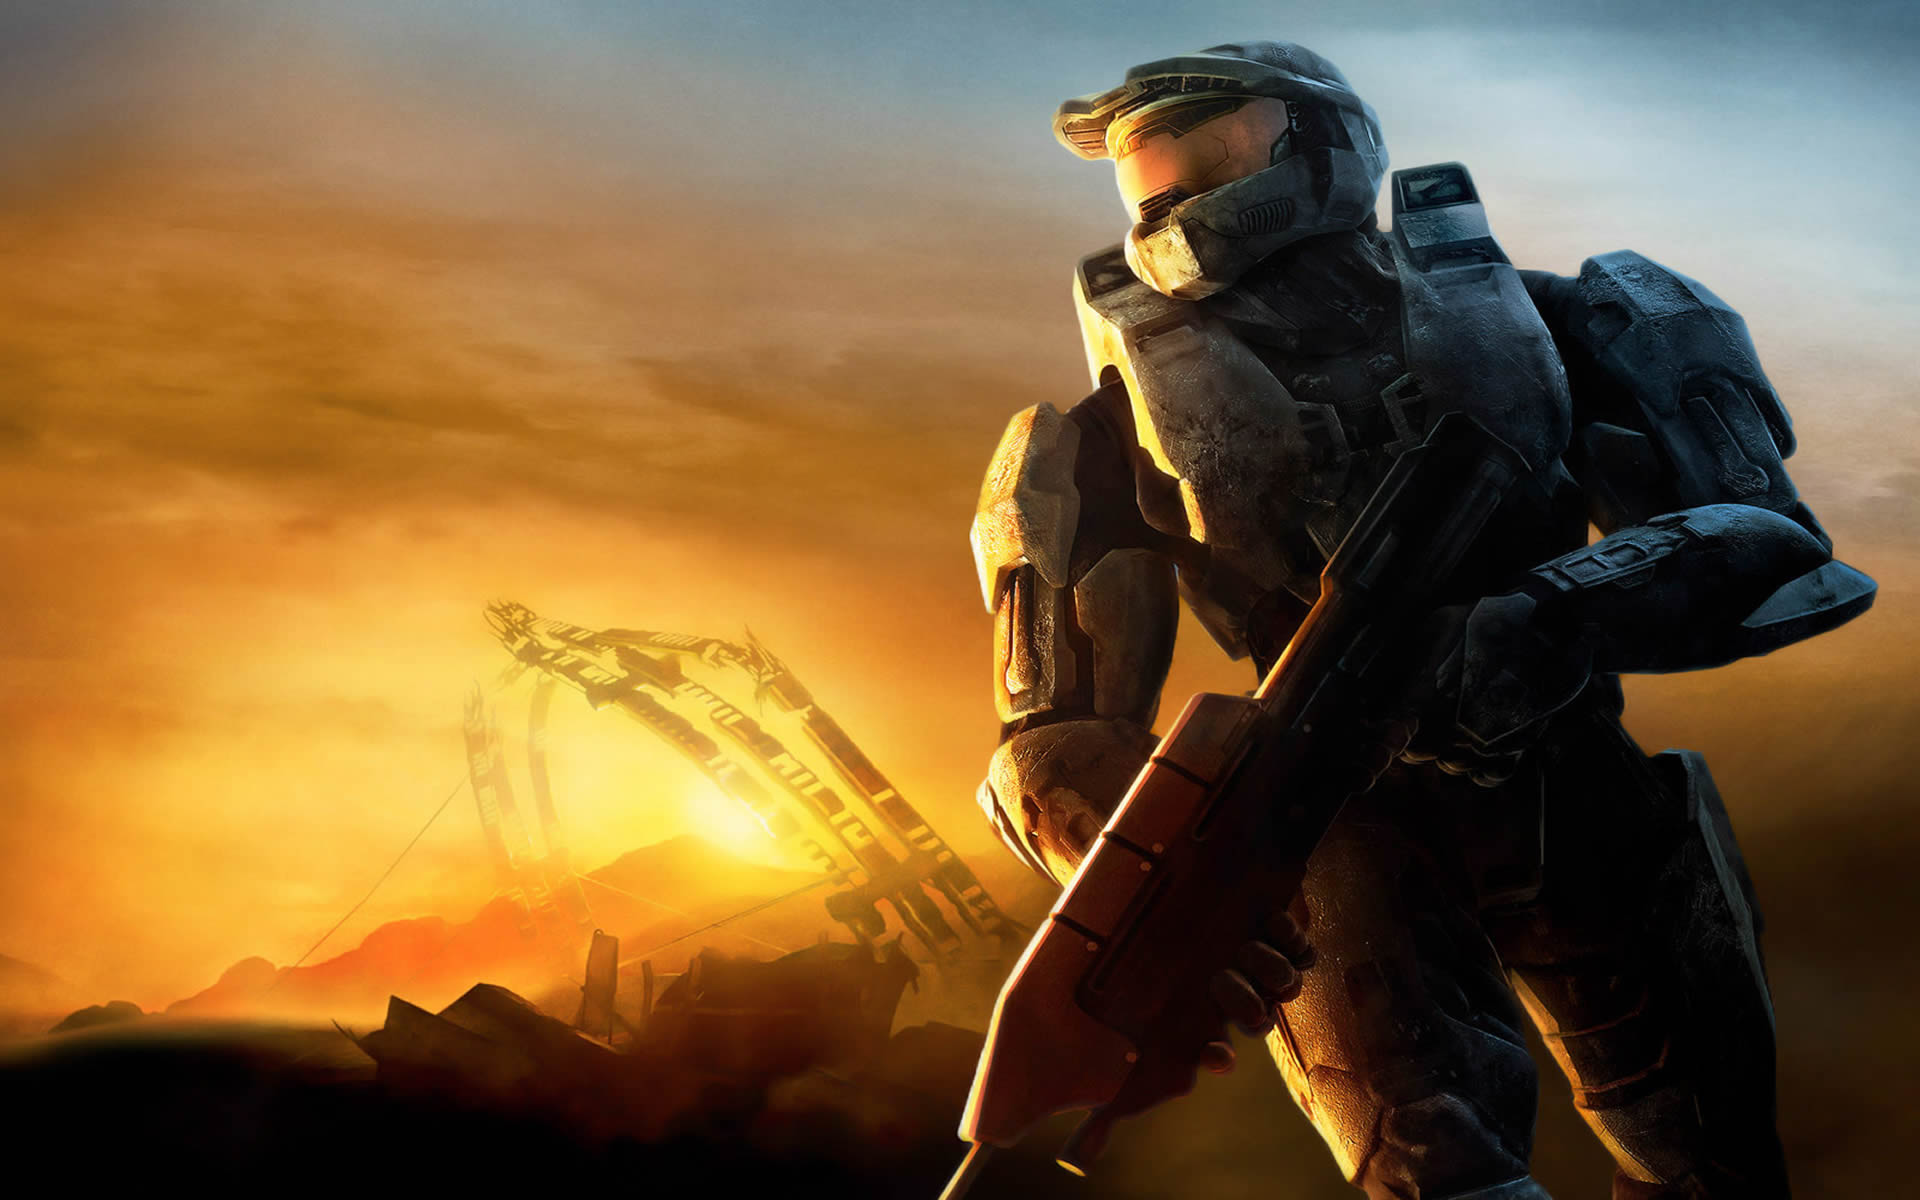 Master Chief Sunset Action Games Wallpaper Image Featuring Halo